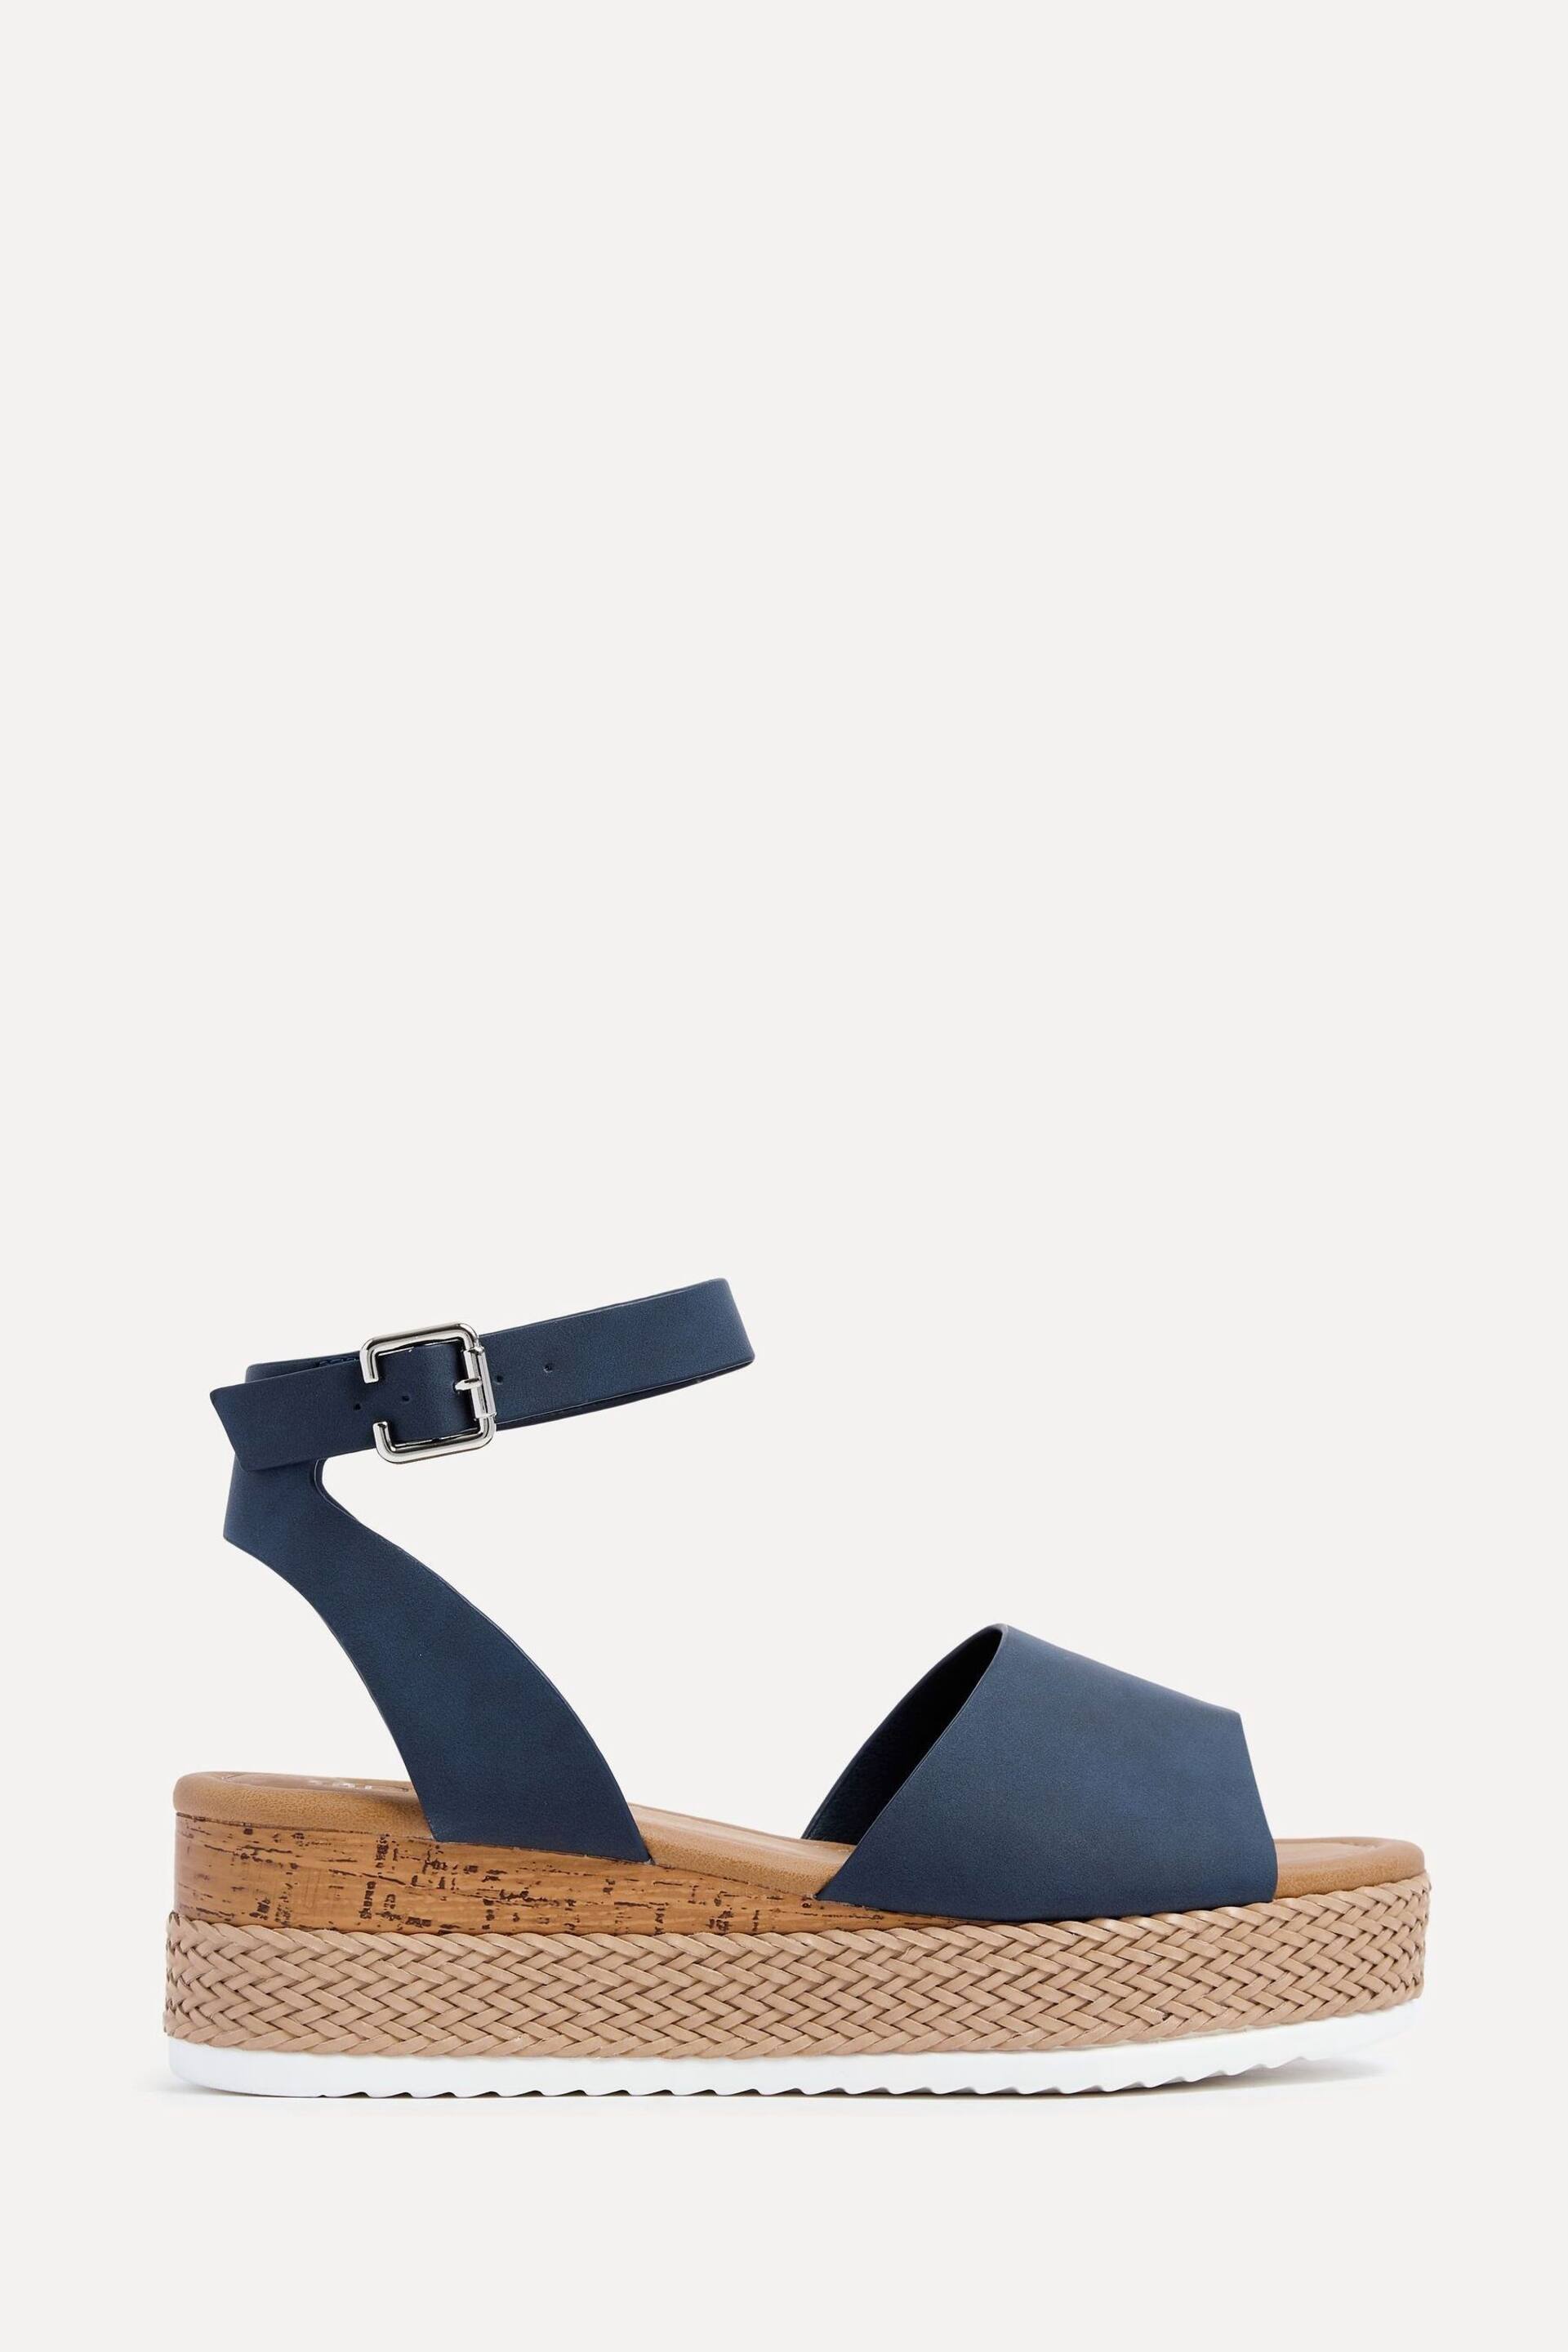 Linzi Blue Wide Fit Shore Wedges With Cork Detail And Ankle Strap - Image 2 of 5